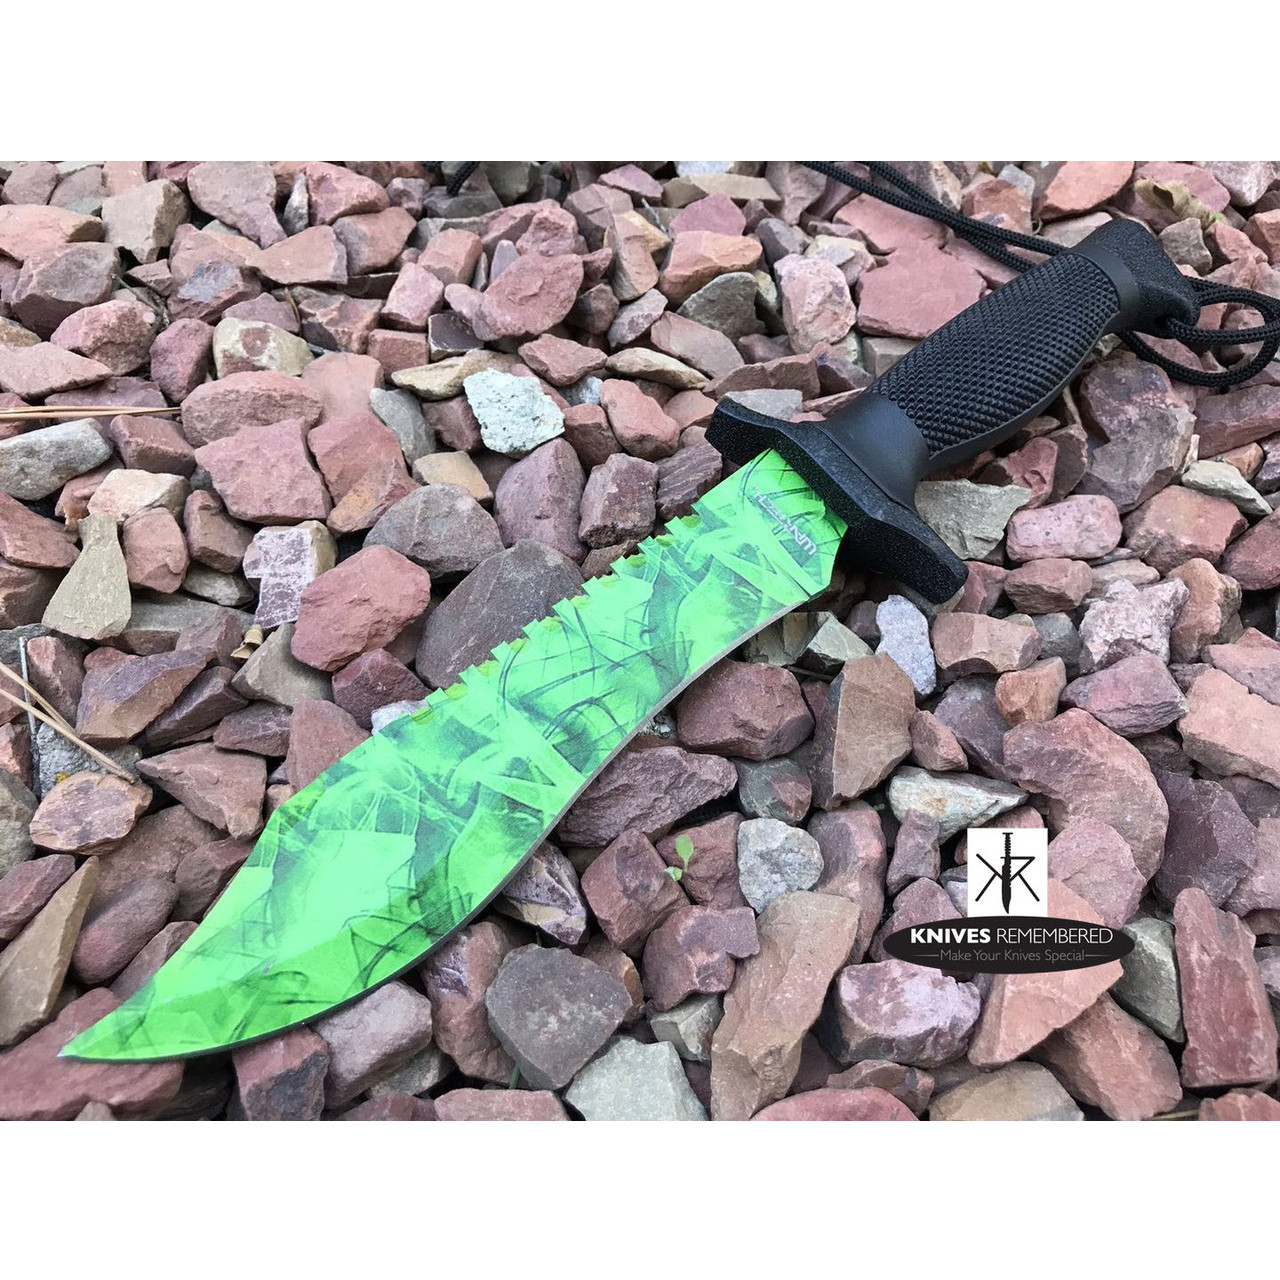 12 COUNTER-STRIKE JUNGLE CS GO FIXED Blade KNIFE Hunting Bowie